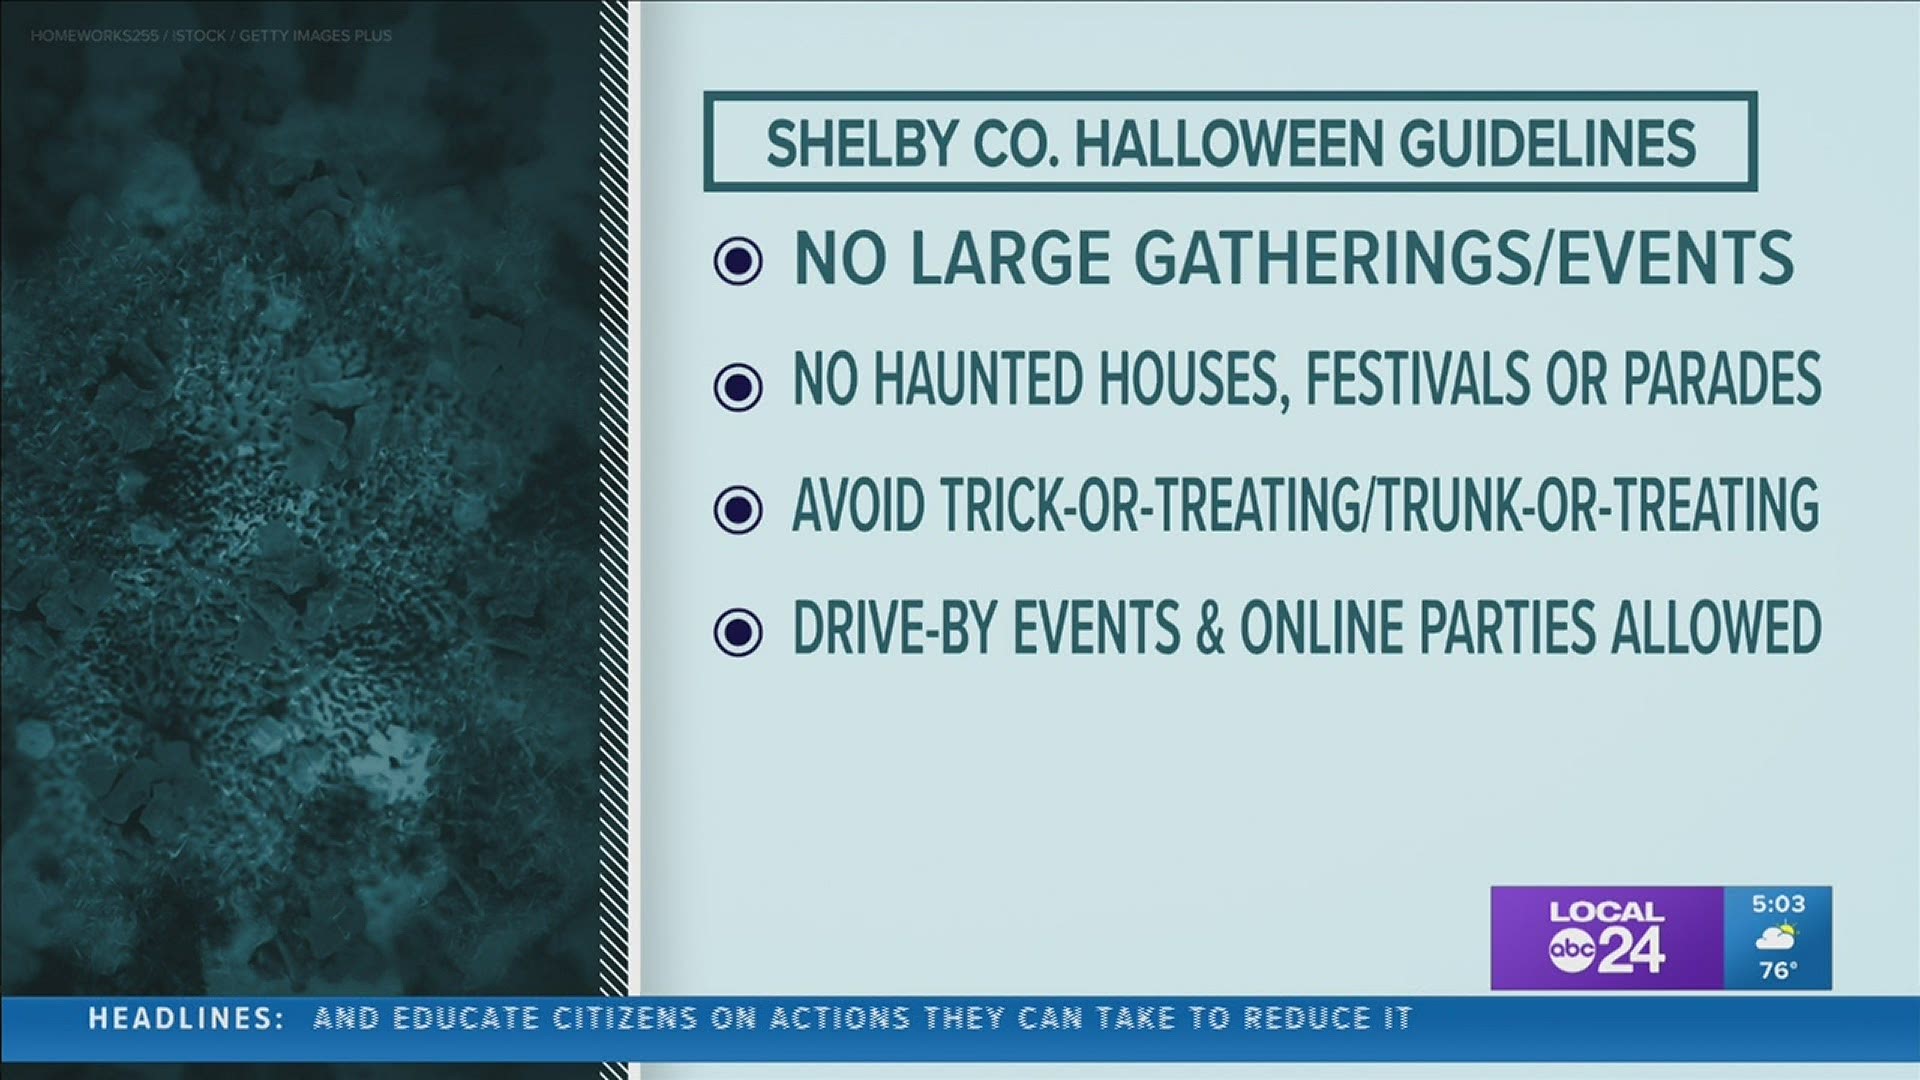 Parties and events that encourage large crowds are not permitted, even if held outdoors. Trick-or-treating is not recommended.